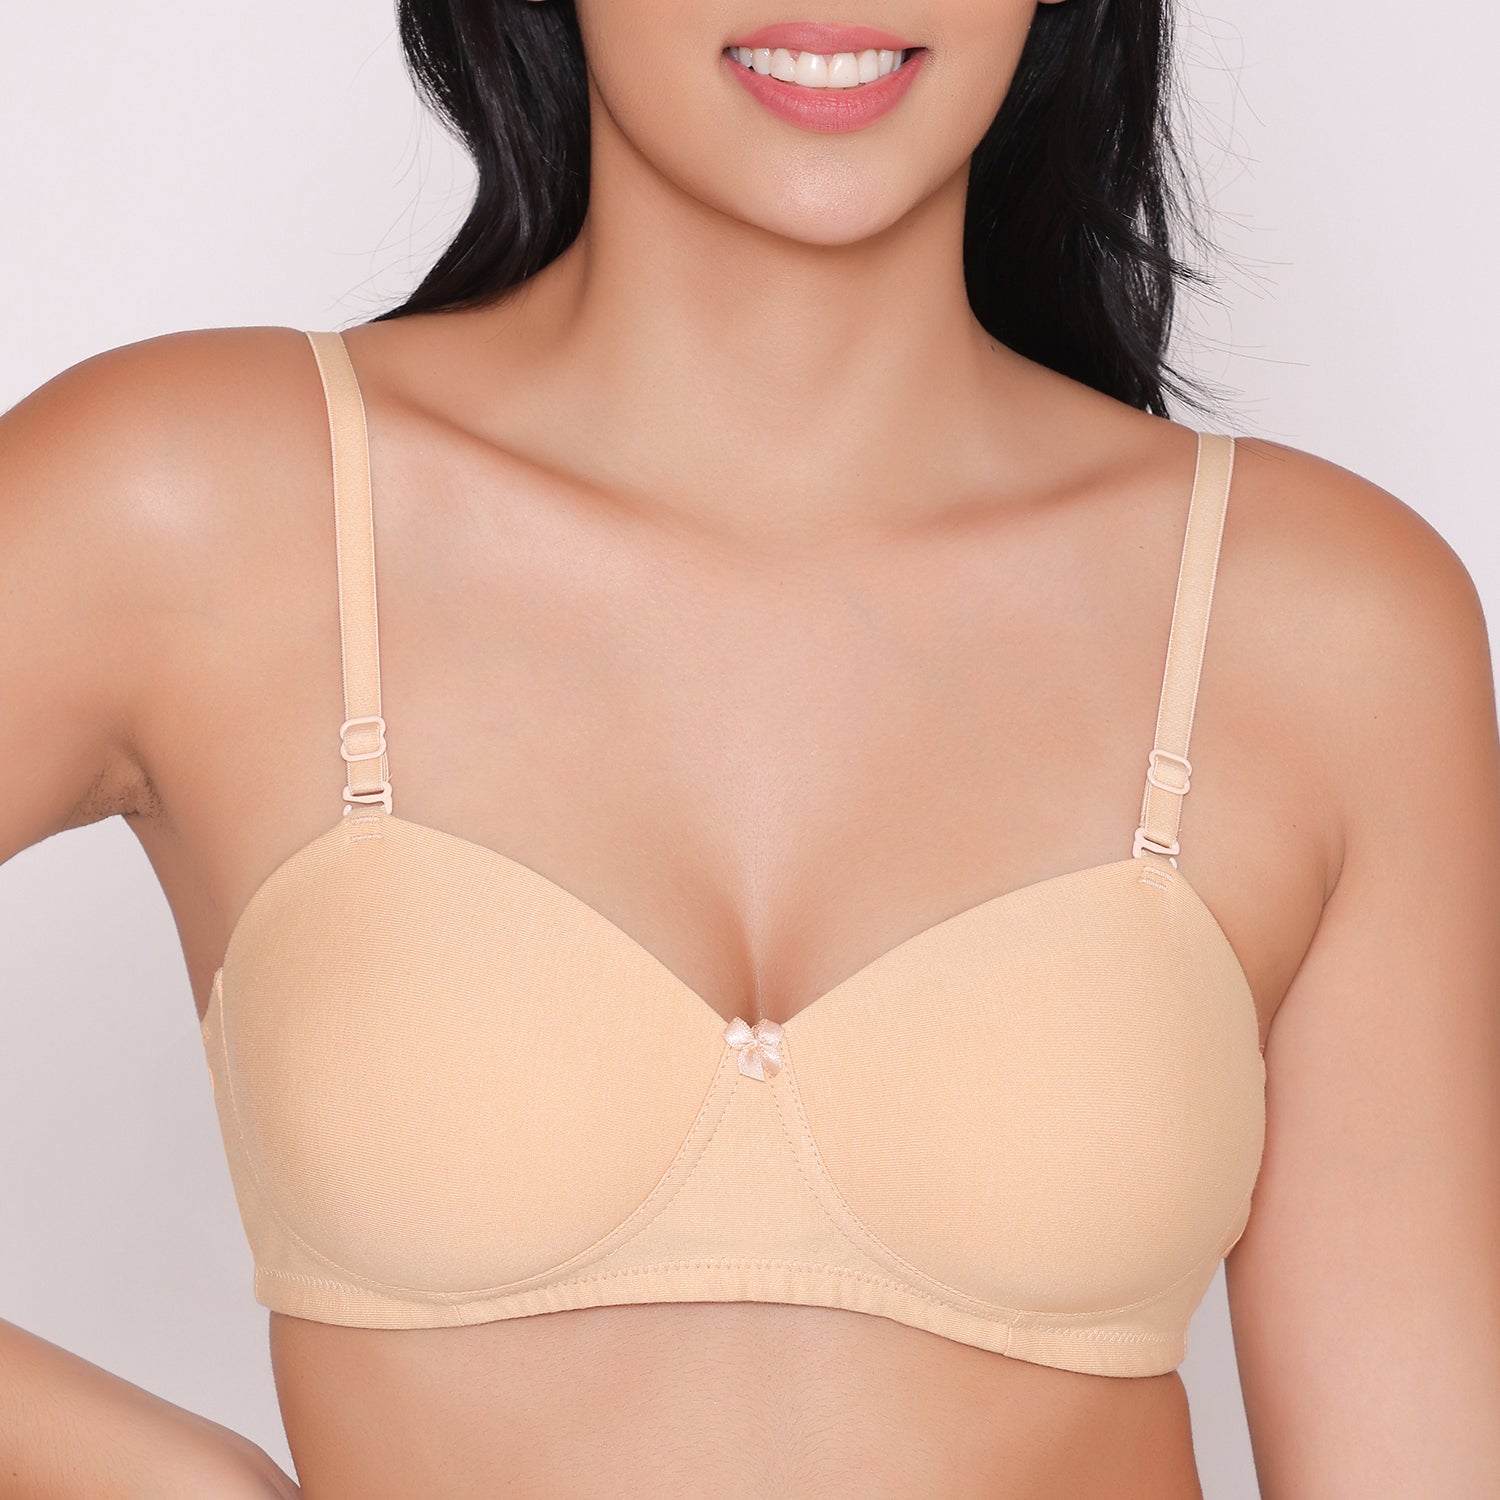 Inkurv Revolutionizes Lingerie Shopping: Buy Bras Online in India with Ease  - IssueWire